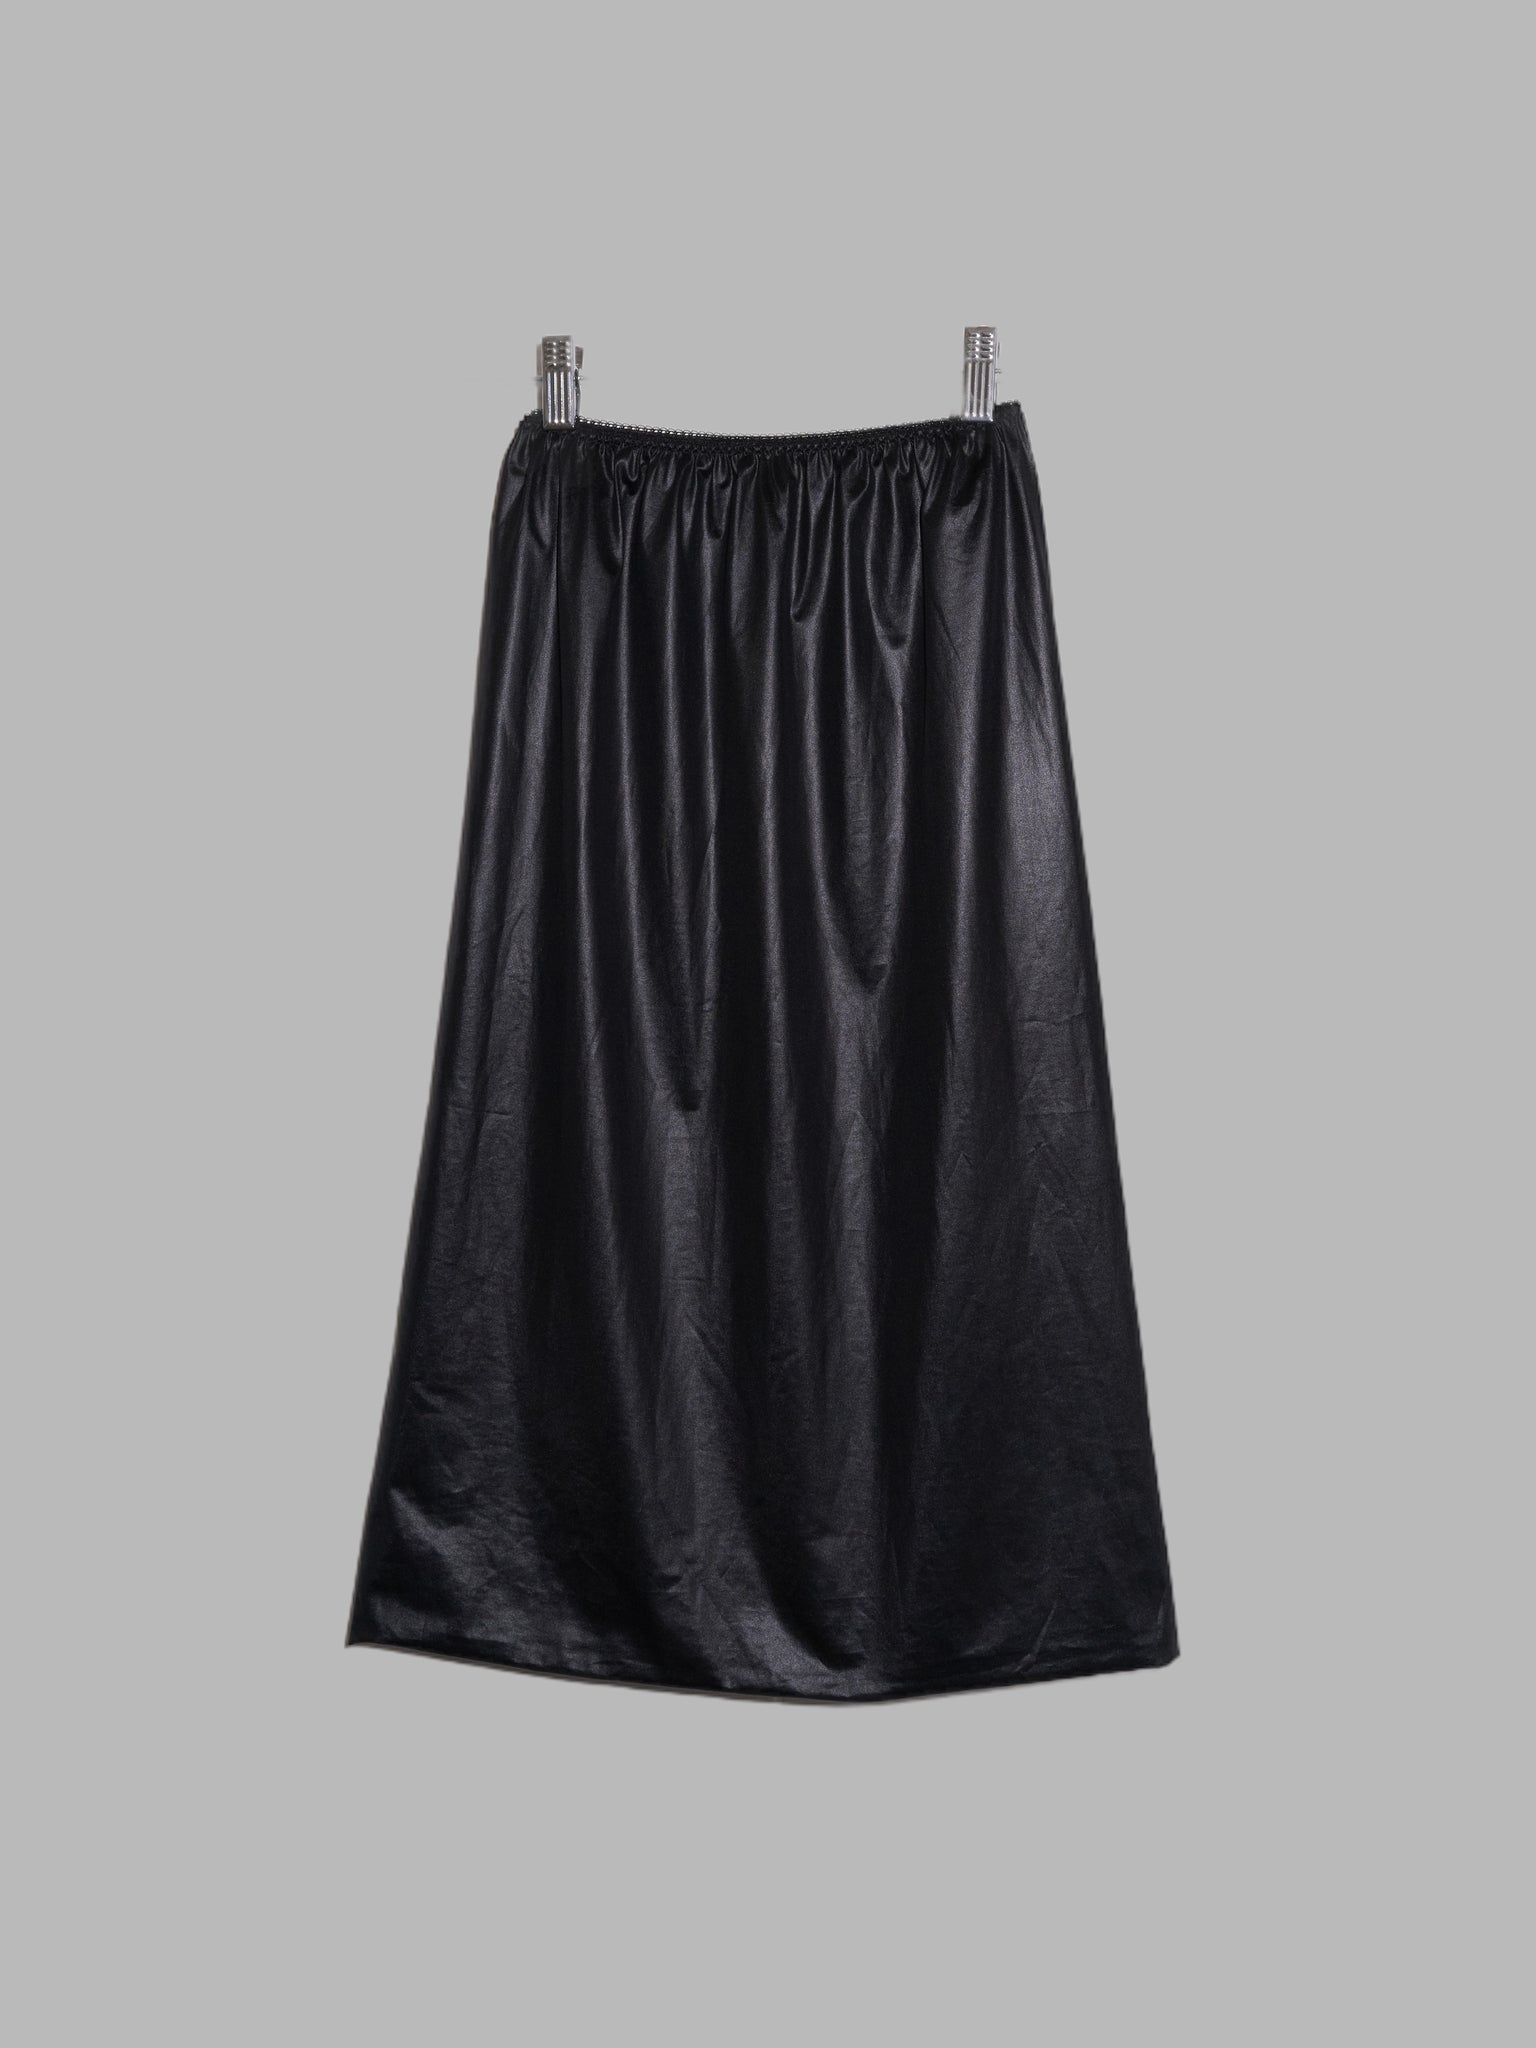 Jean Colonna sheeny black tube dress or double-layered skirt - size 38